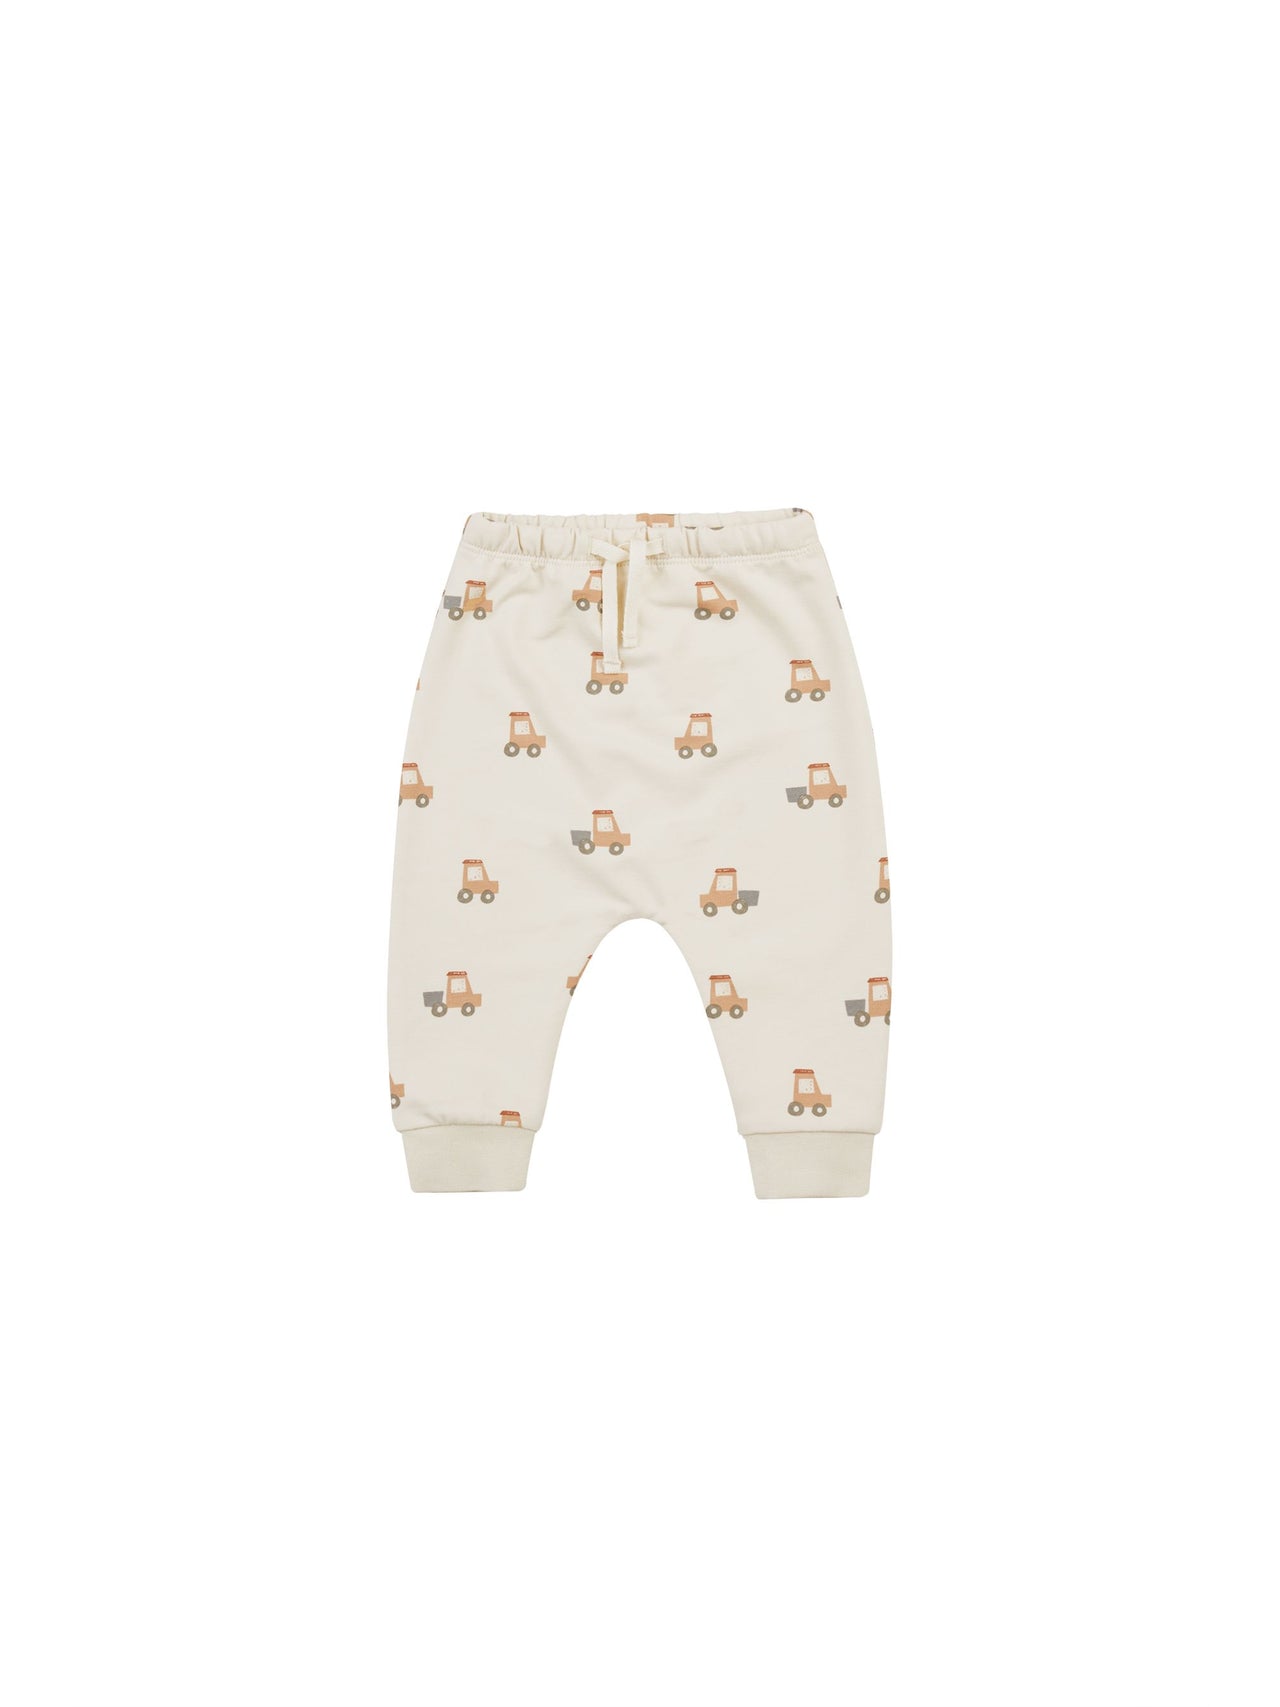 Quincy Mae Relaxed Sweatpant, Tractors